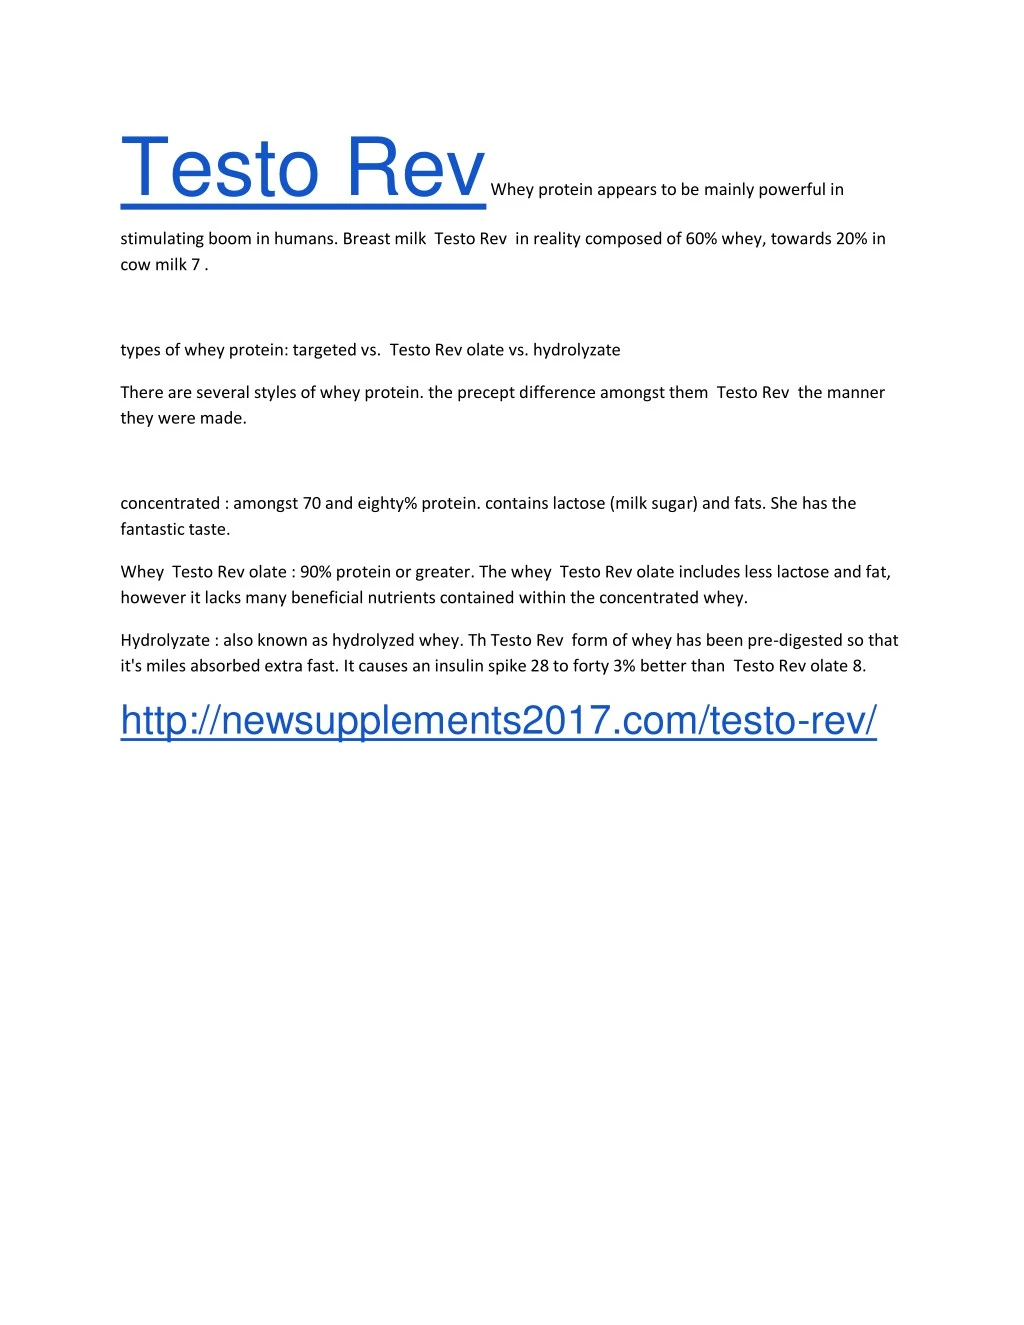 testo rev whey protein appears to be mainly